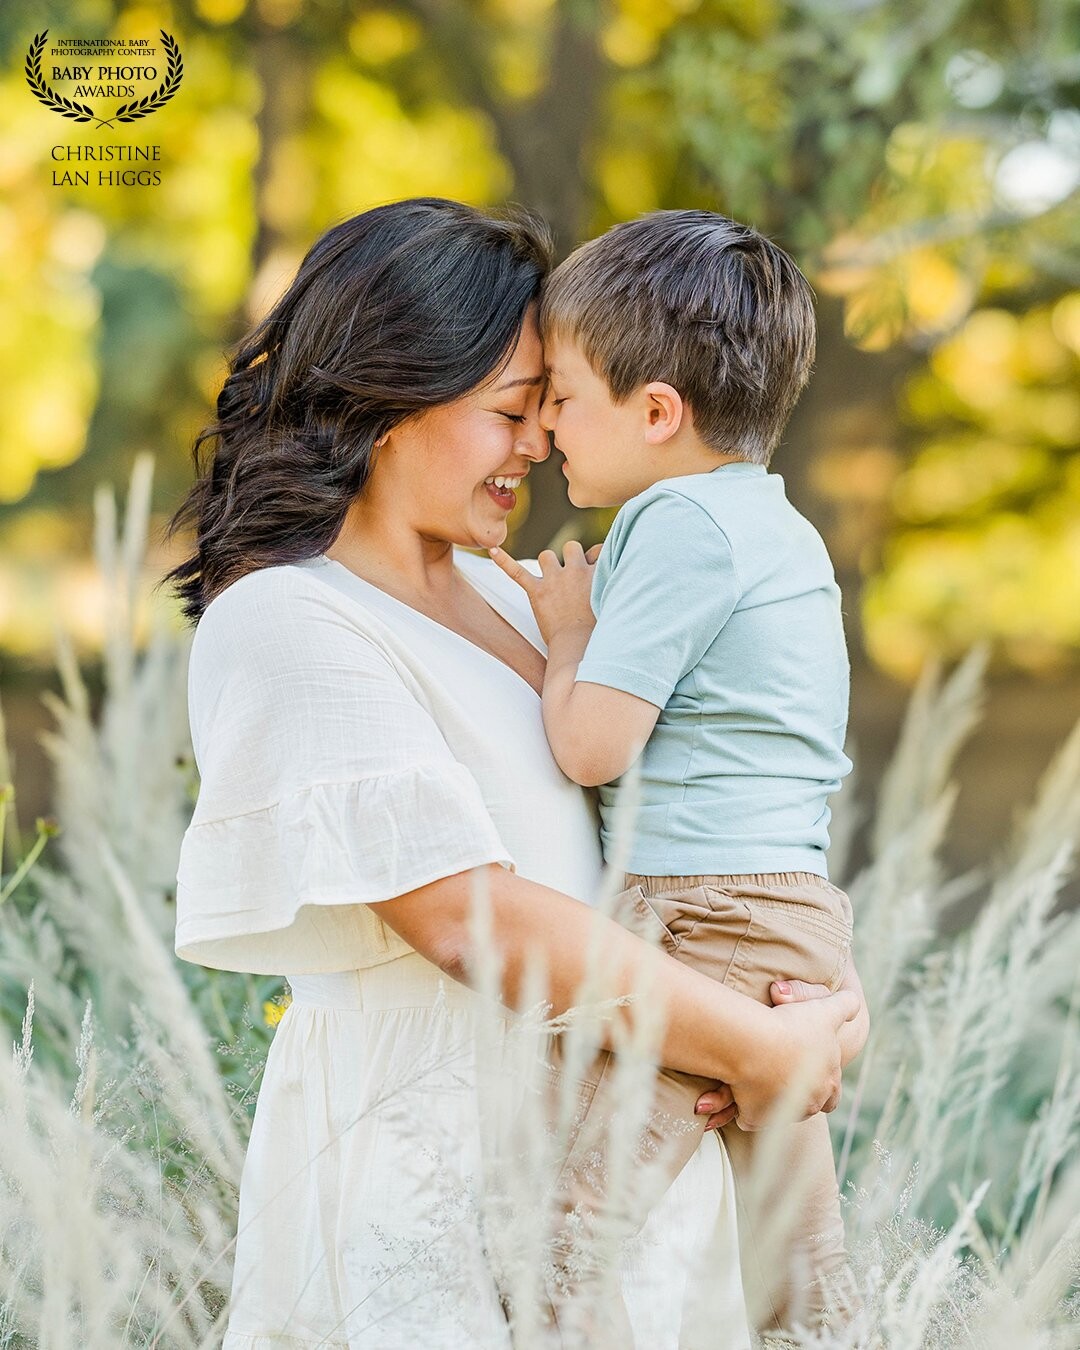 Sebastian just turned 5, and his mom wanted to capture this special time in his life with her.  Right before I took this photo, I  told Sebastian to show his mom some love. He turned to her and this sweet moment happened.